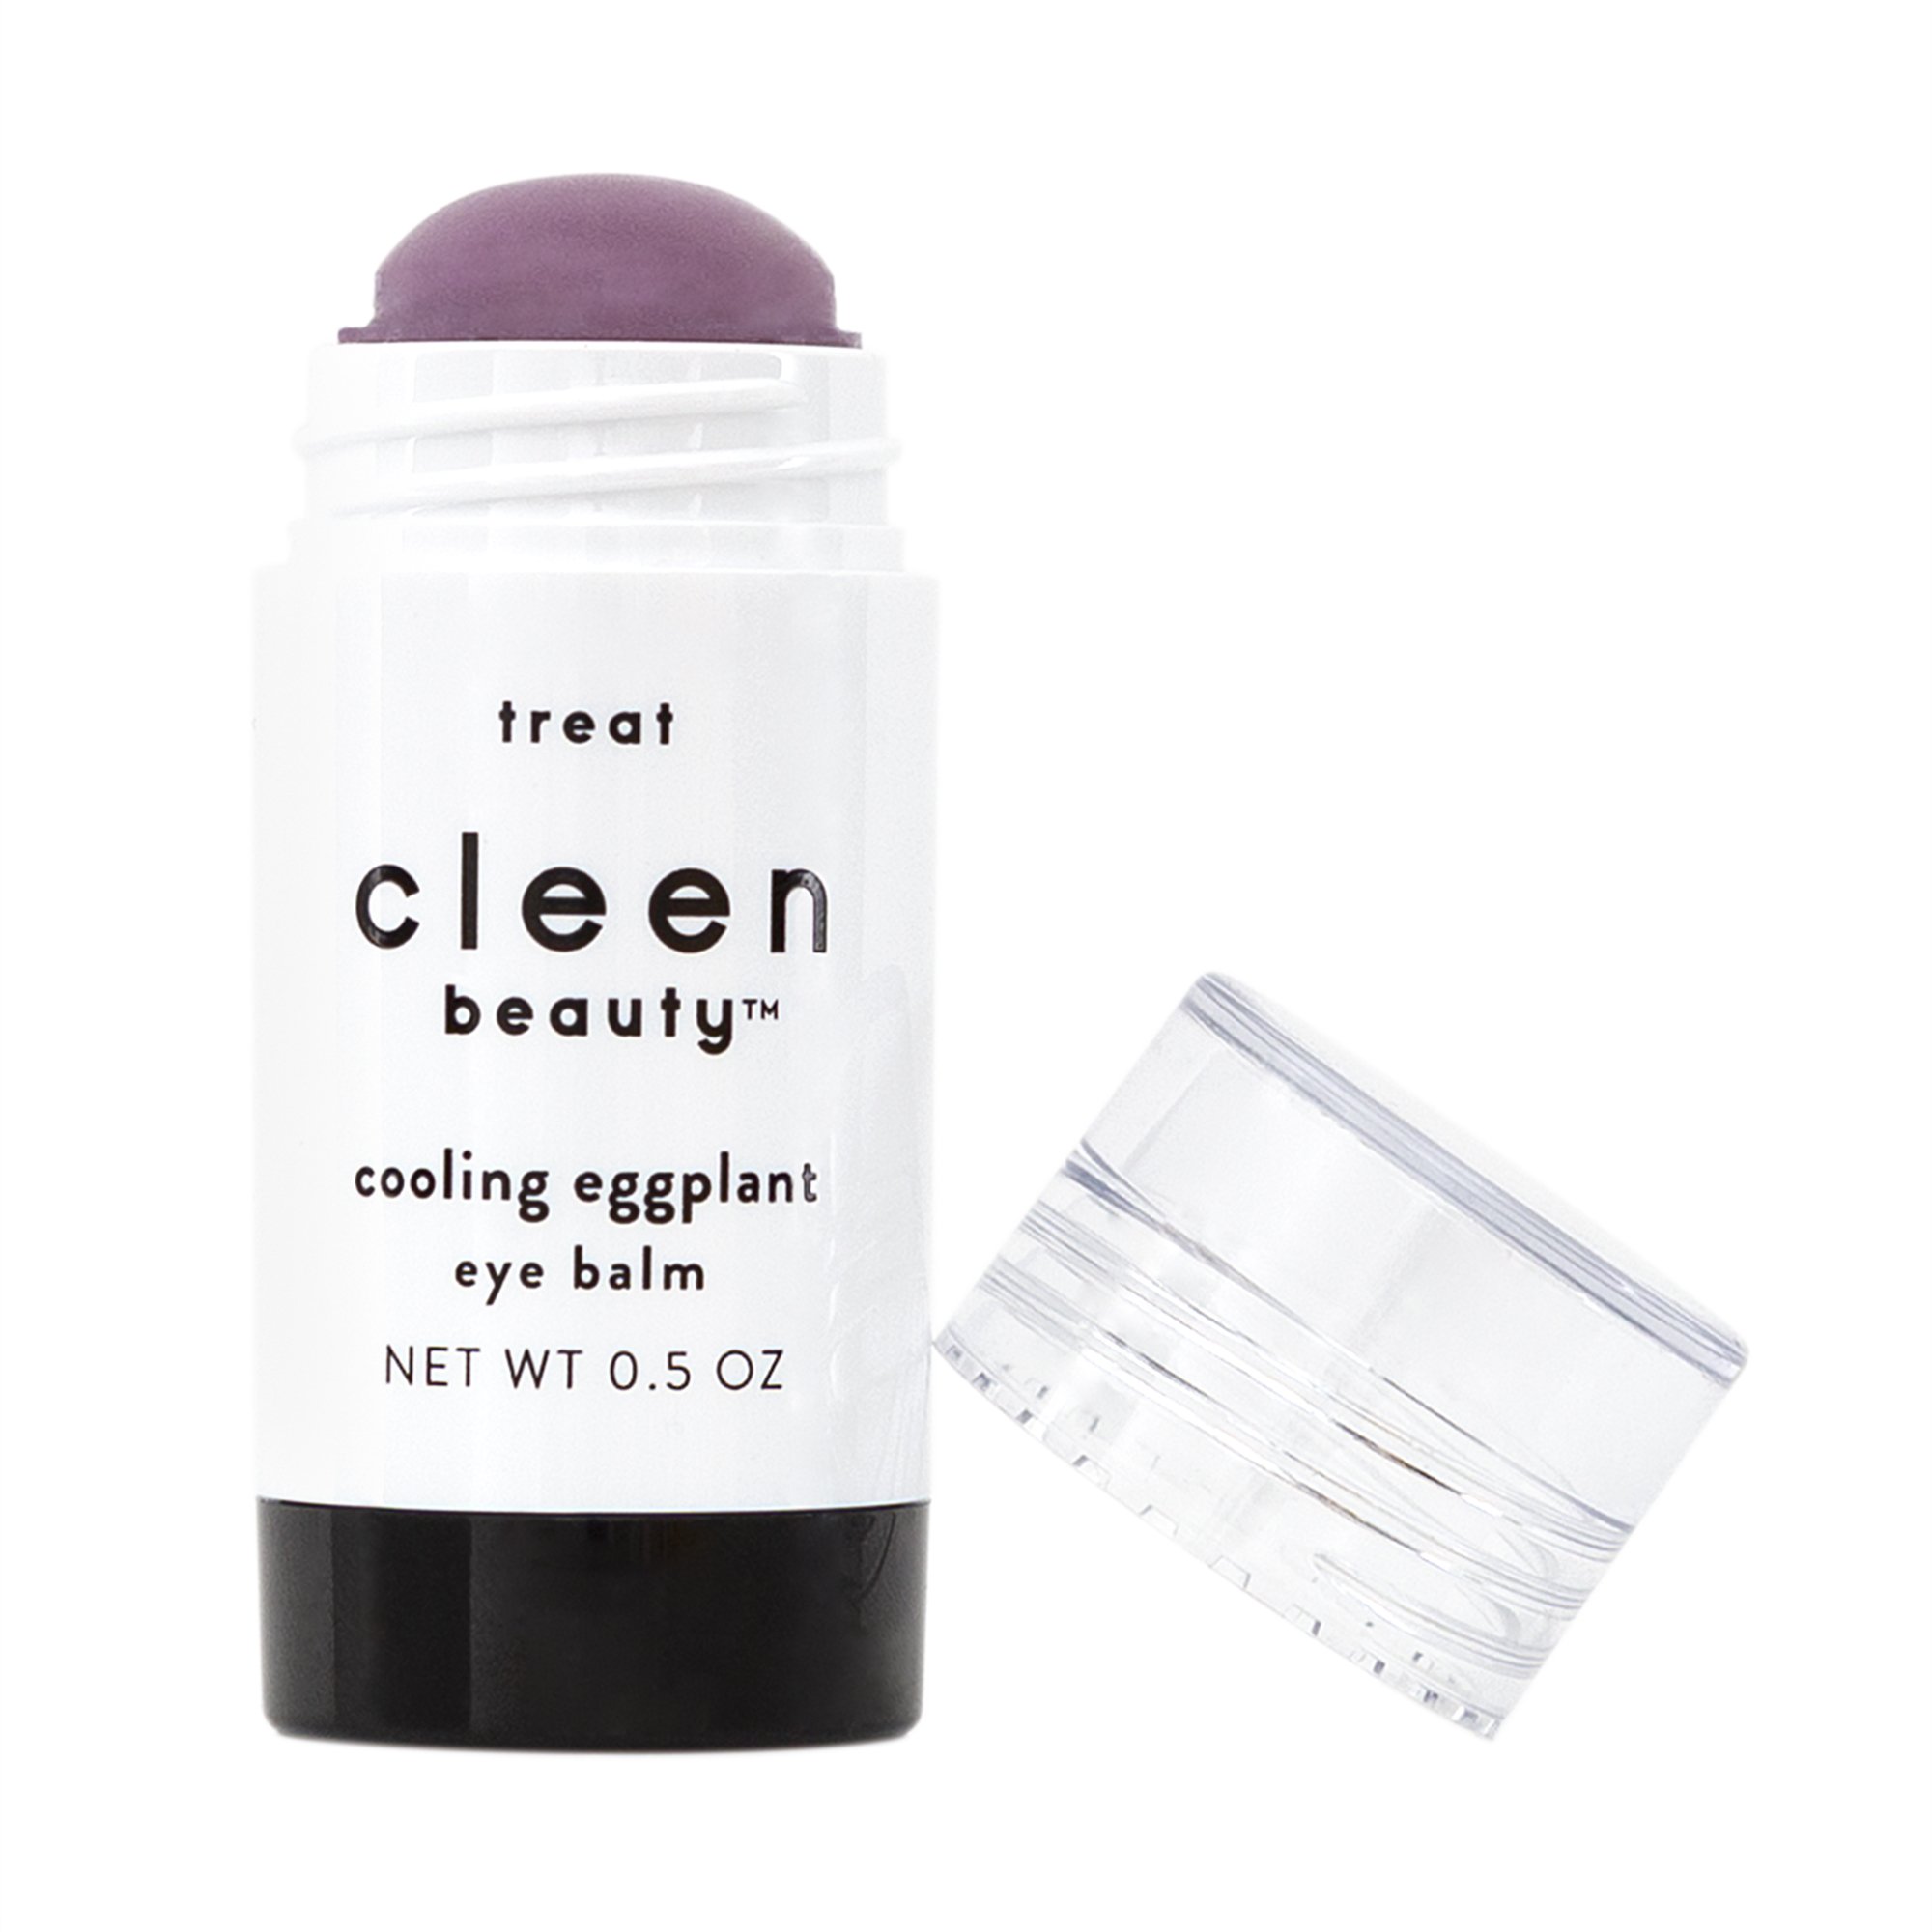 cleen beauty Cooling Eye Balm with Eggplant & Coffee Oil, 0.5 oz - image 2 of 7